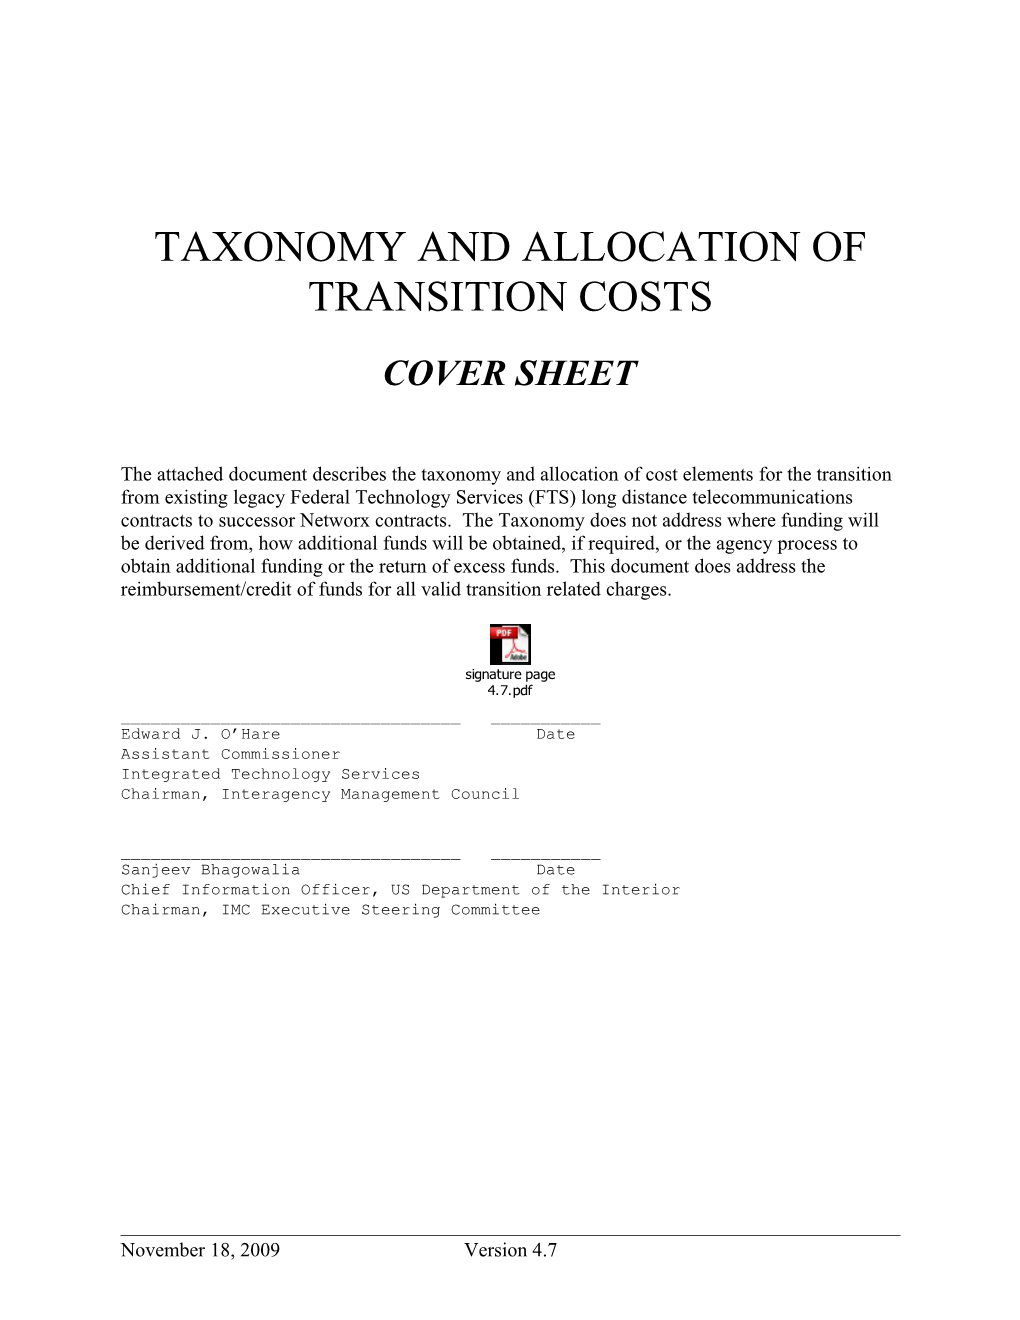 Taxonomy and Allocation of Transition Costs